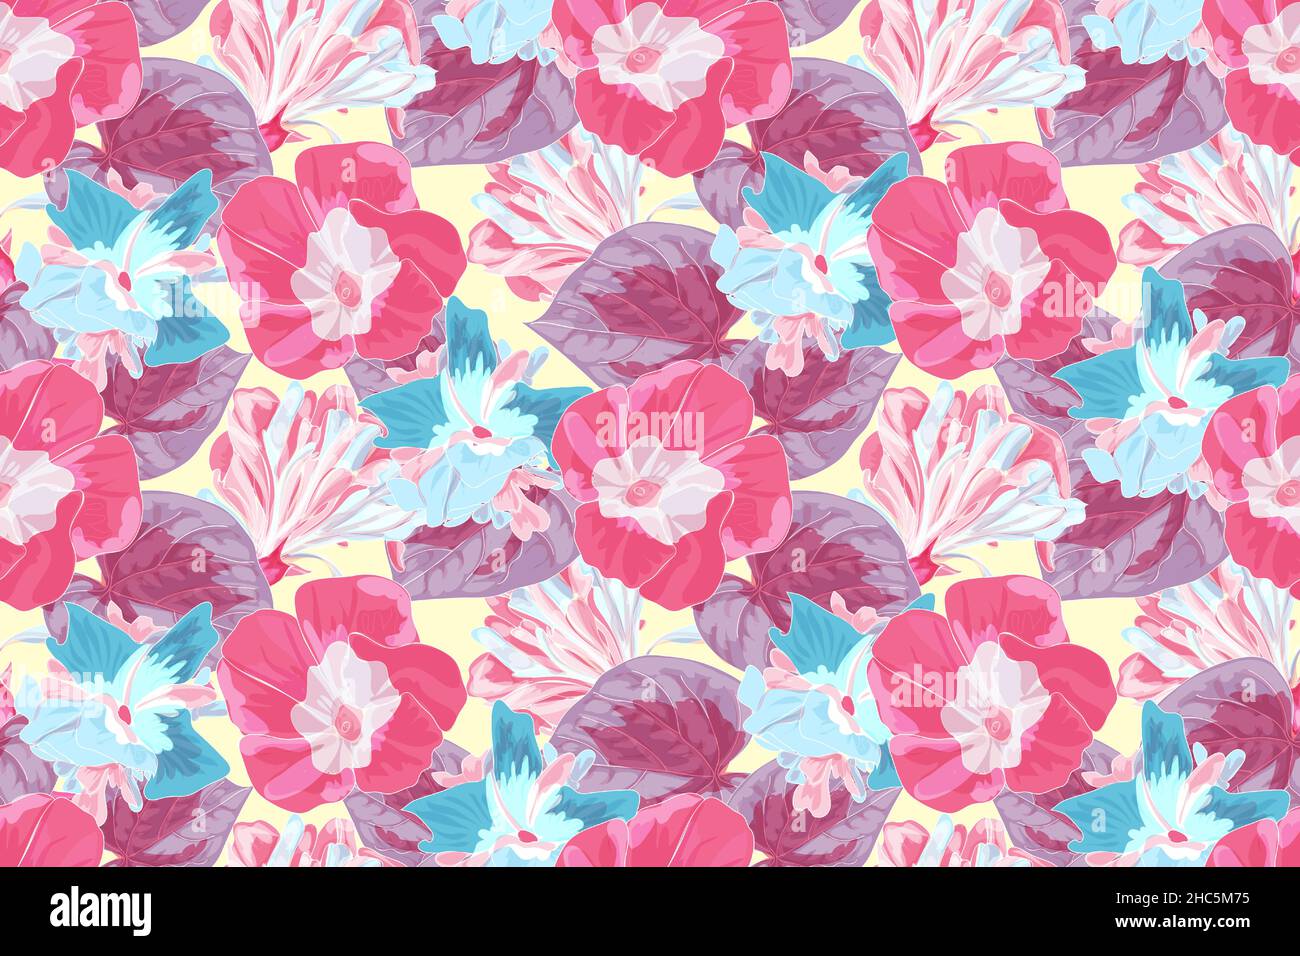 Art floral vector seamless pattern with glory. Stock Vector